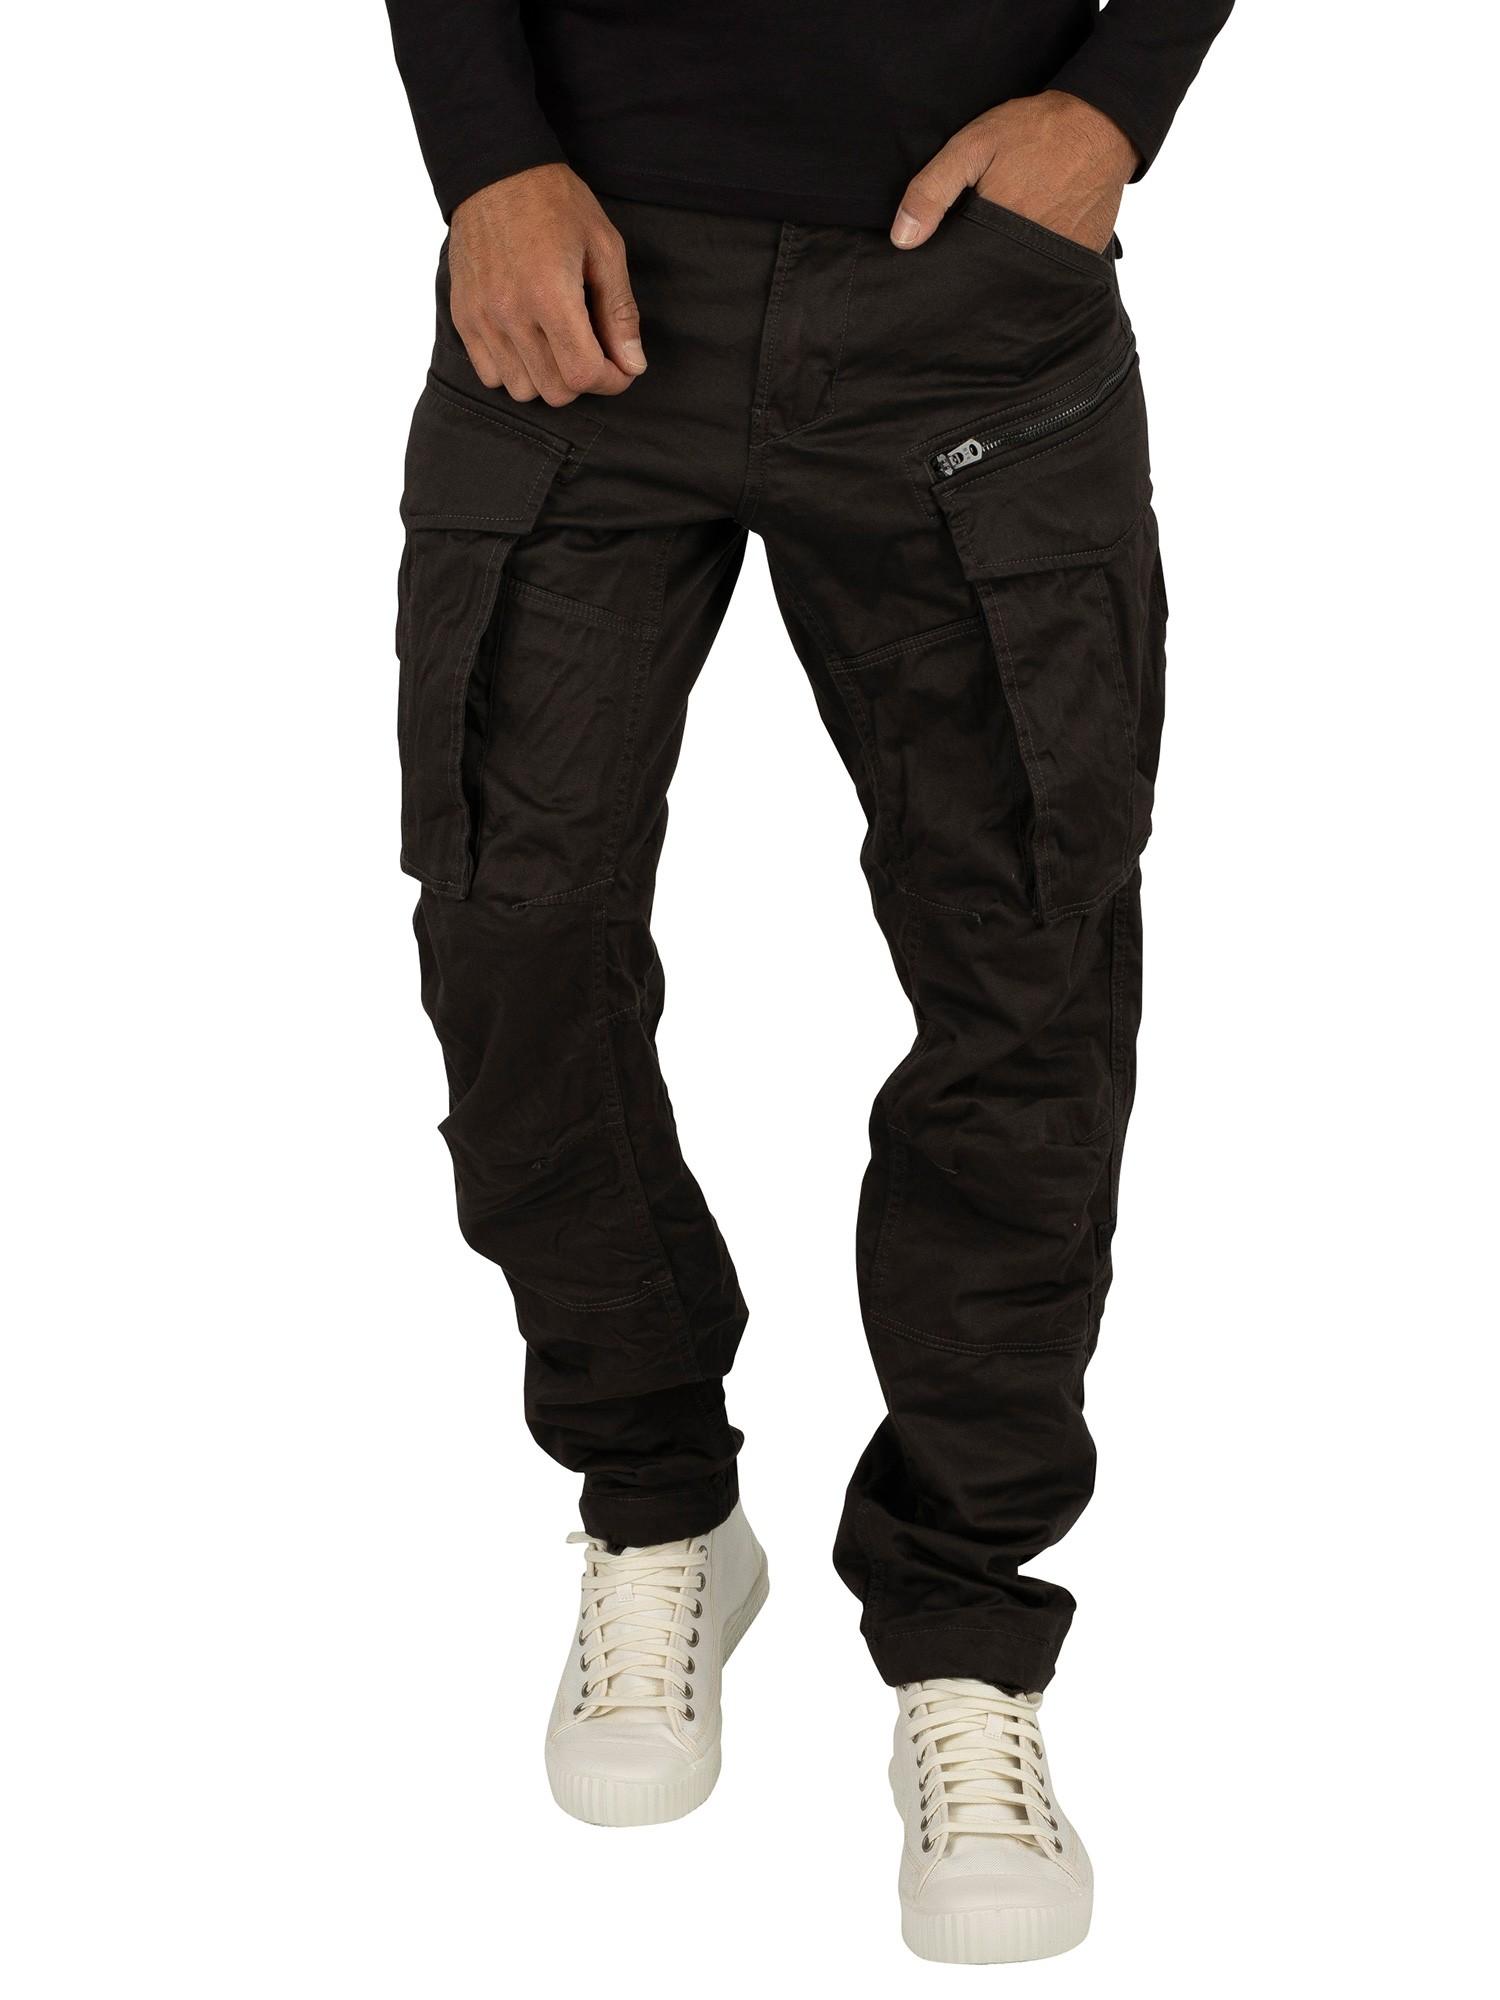 G-Star RAW Rovic Zip 3d Straight Tapered Cargos in Black for Men - Save 44%  - Lyst